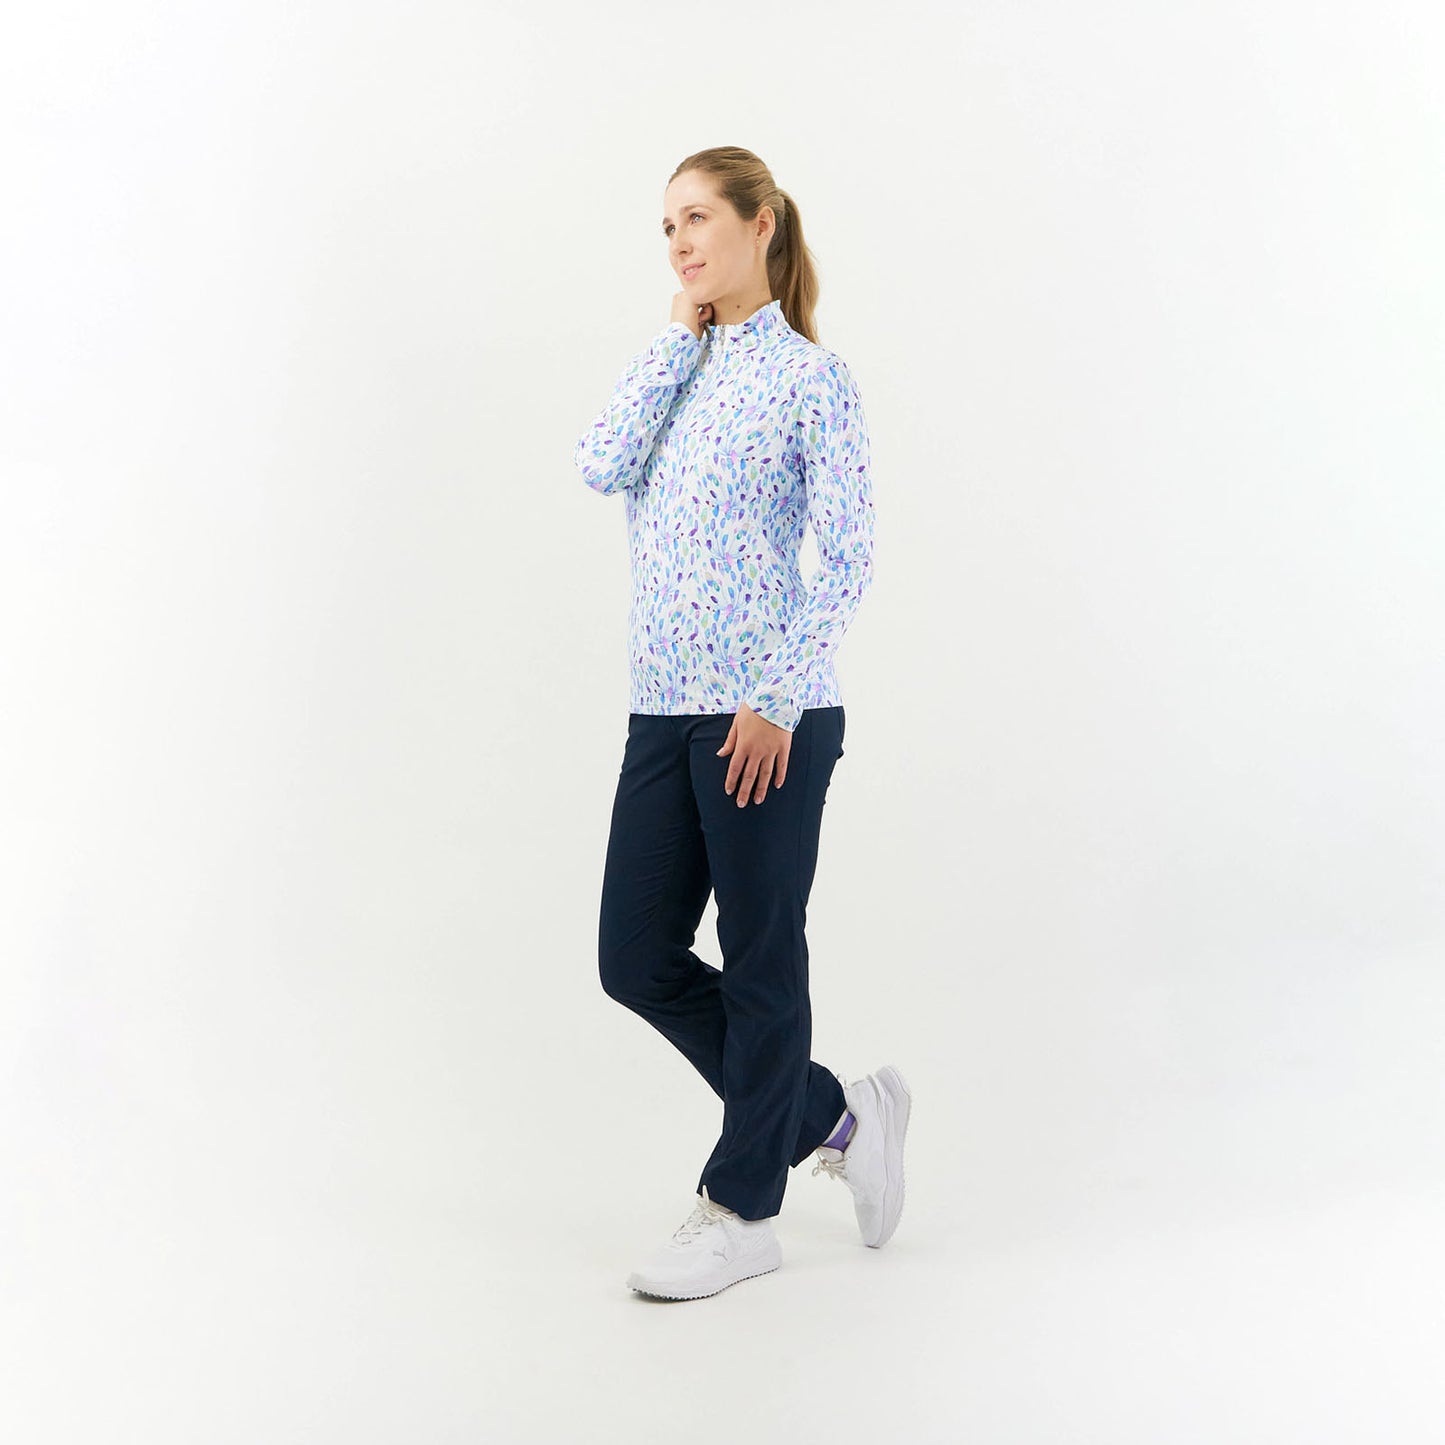 Pure Ladies Long Sleeve Top in Opal Wish Print with Sun Protection